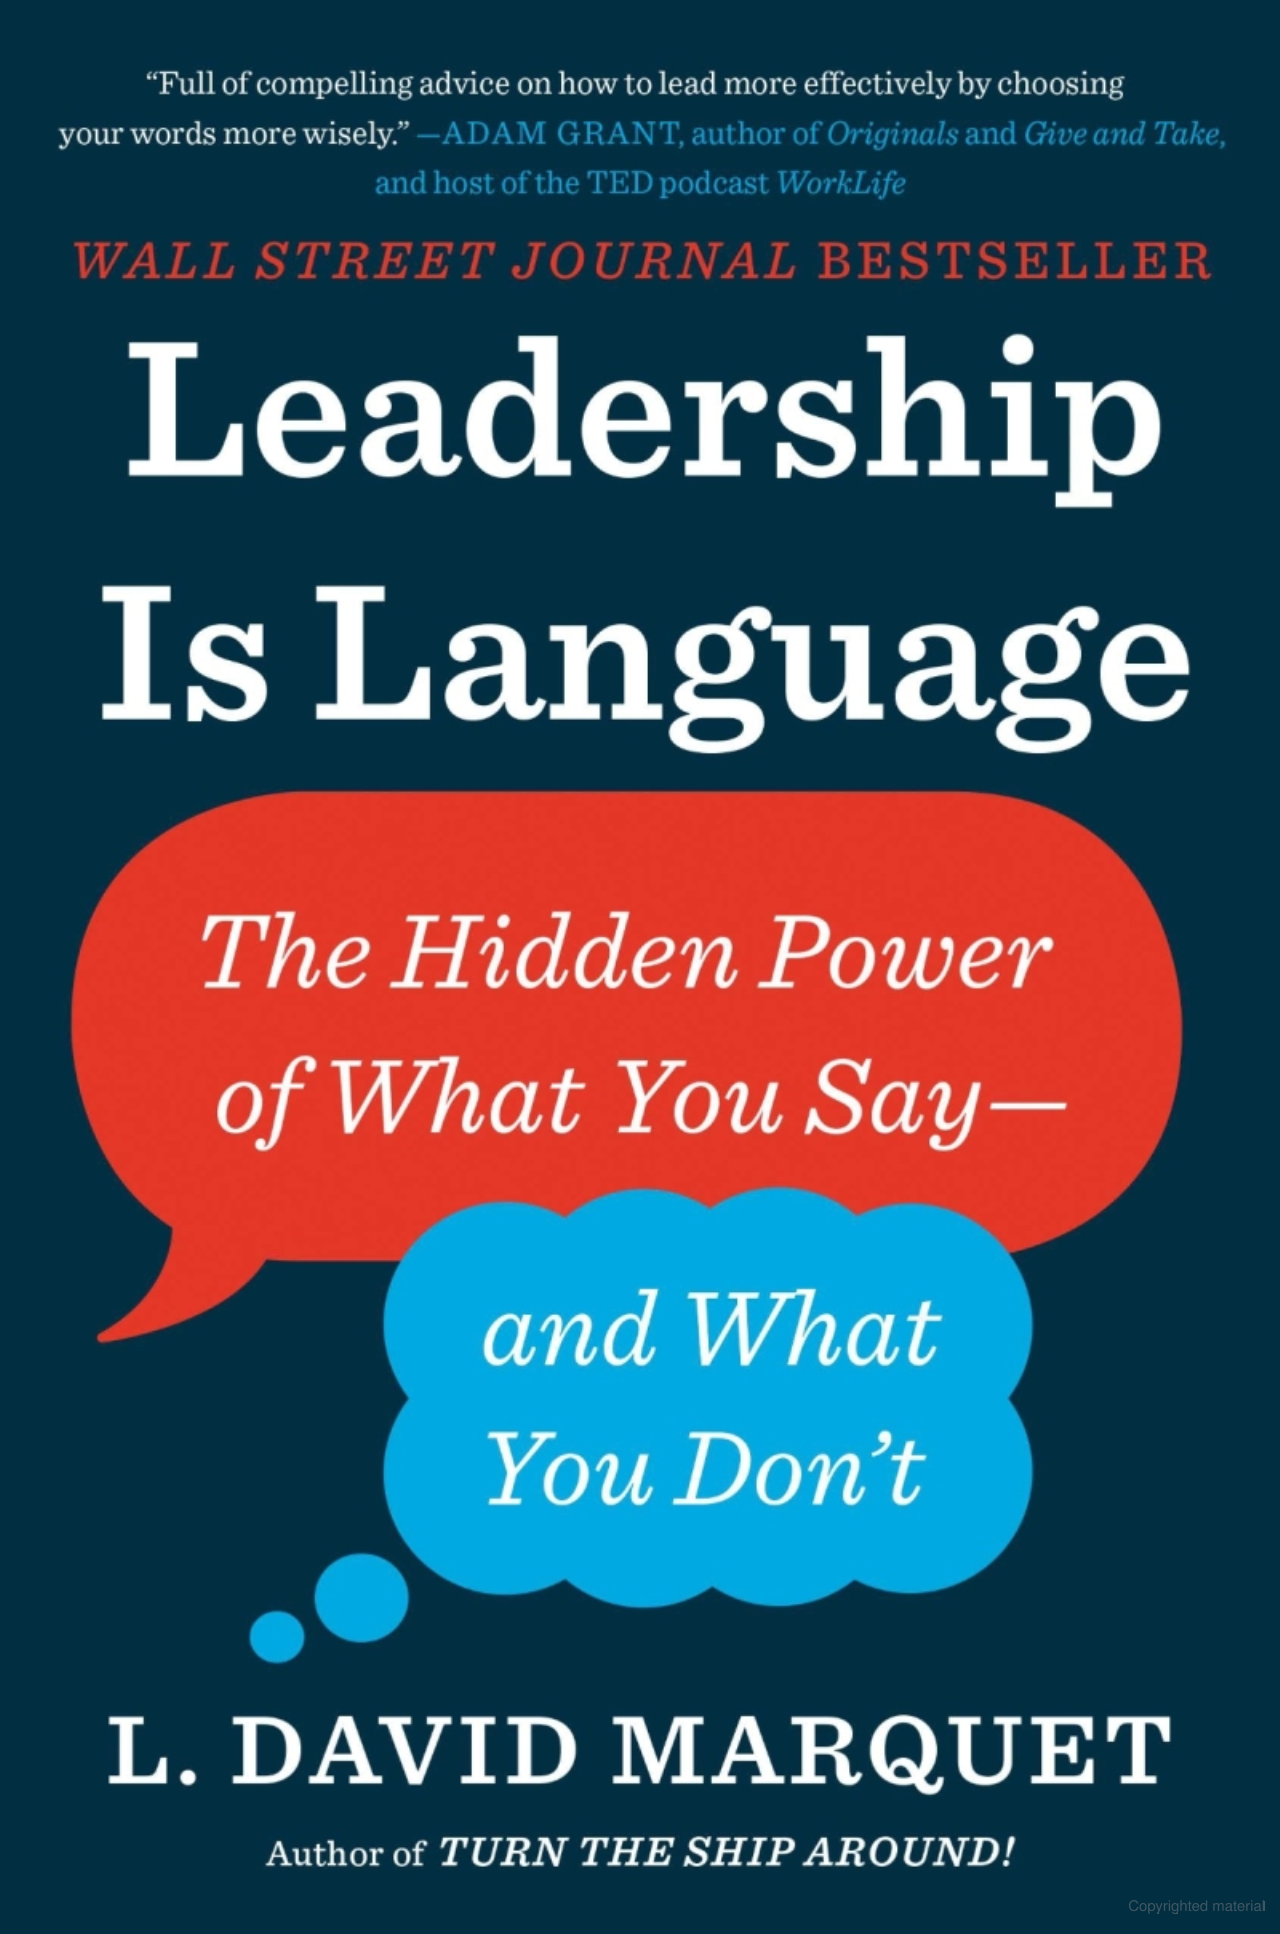 The cover of the book, Leadership is Language by L. David Marquet